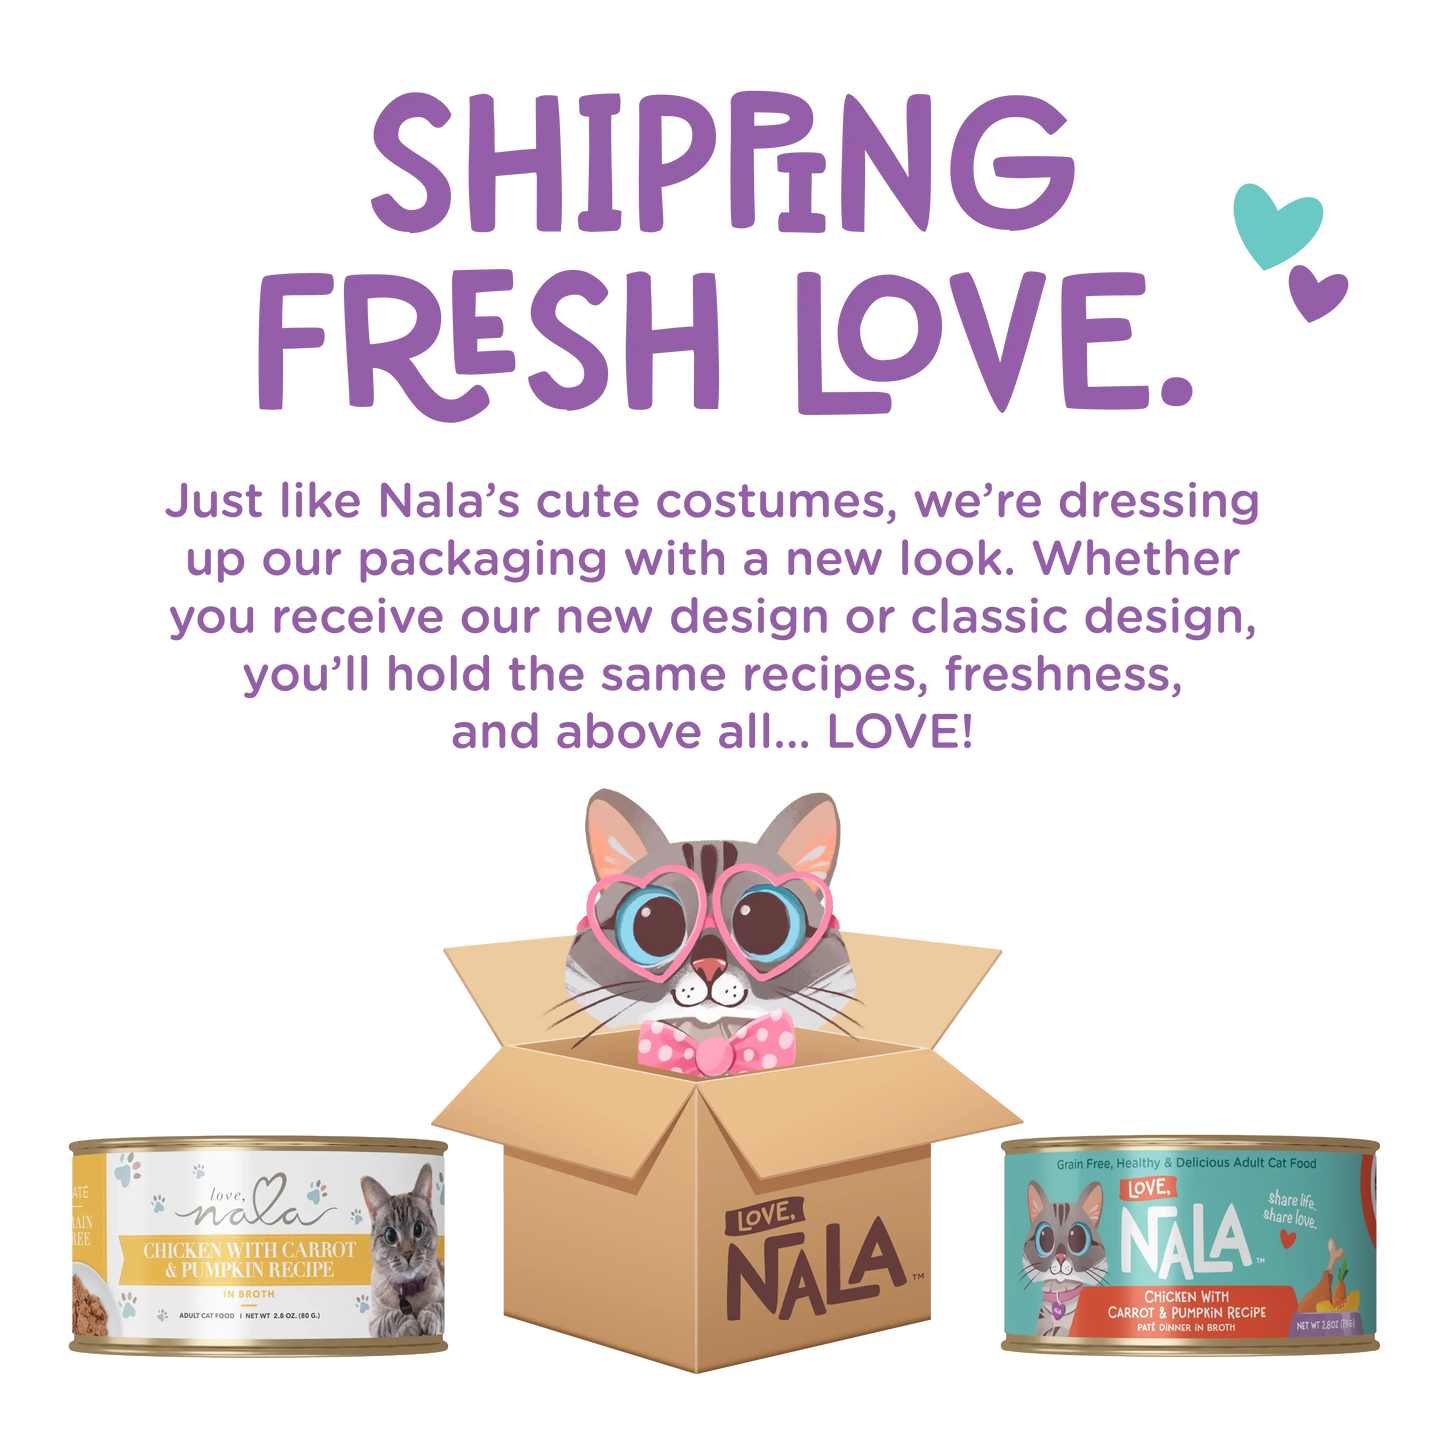 Love, Nala Flaked Chicken with Pumpkin Recipe in Broth Cat Food 2.8oz case of 12 Love Nala